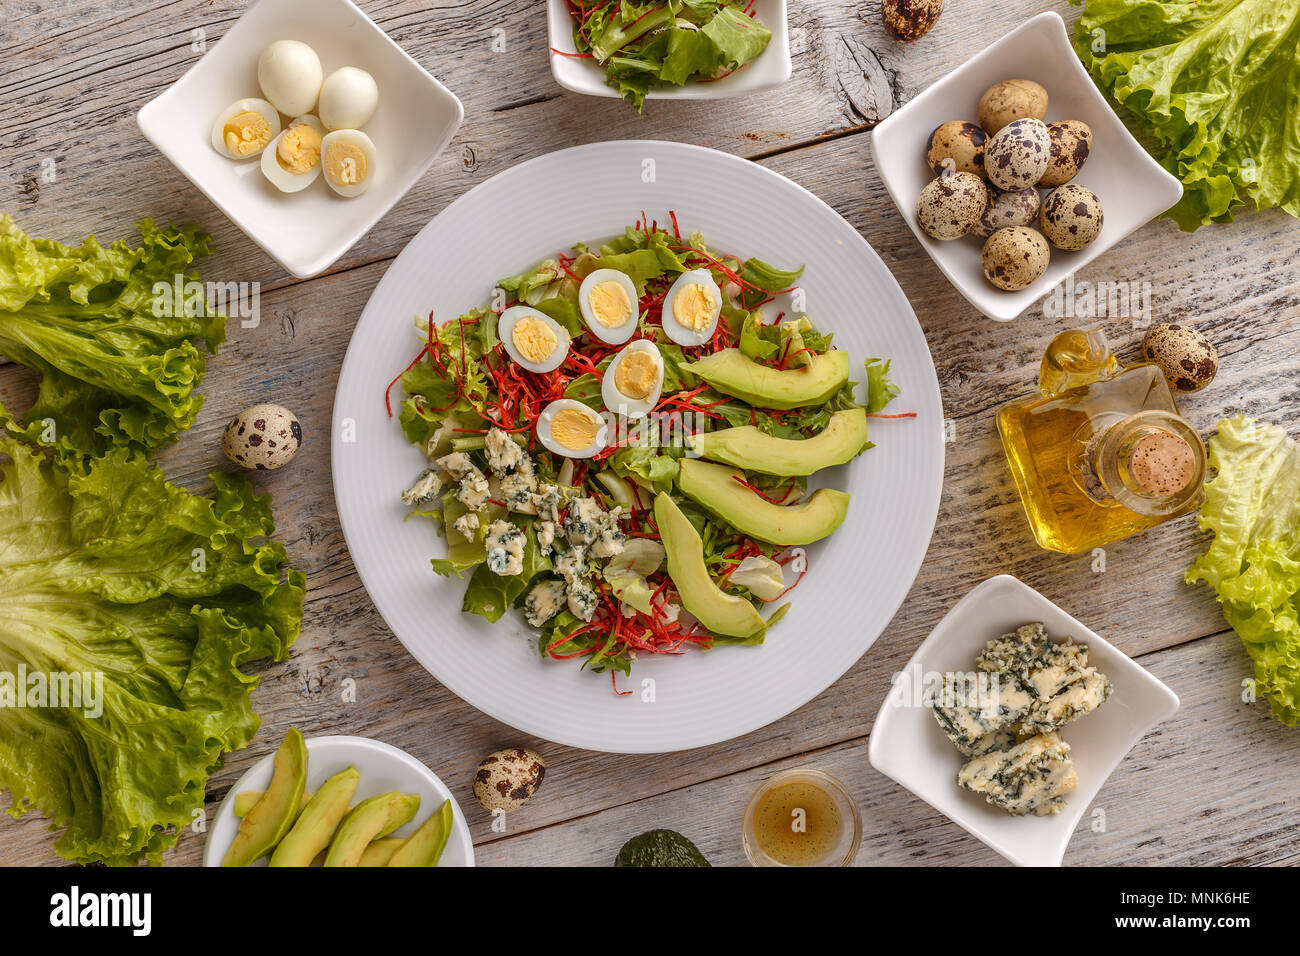 Healthy lunch plate, avocado, quail egg and blue cheese salad Stock Photo